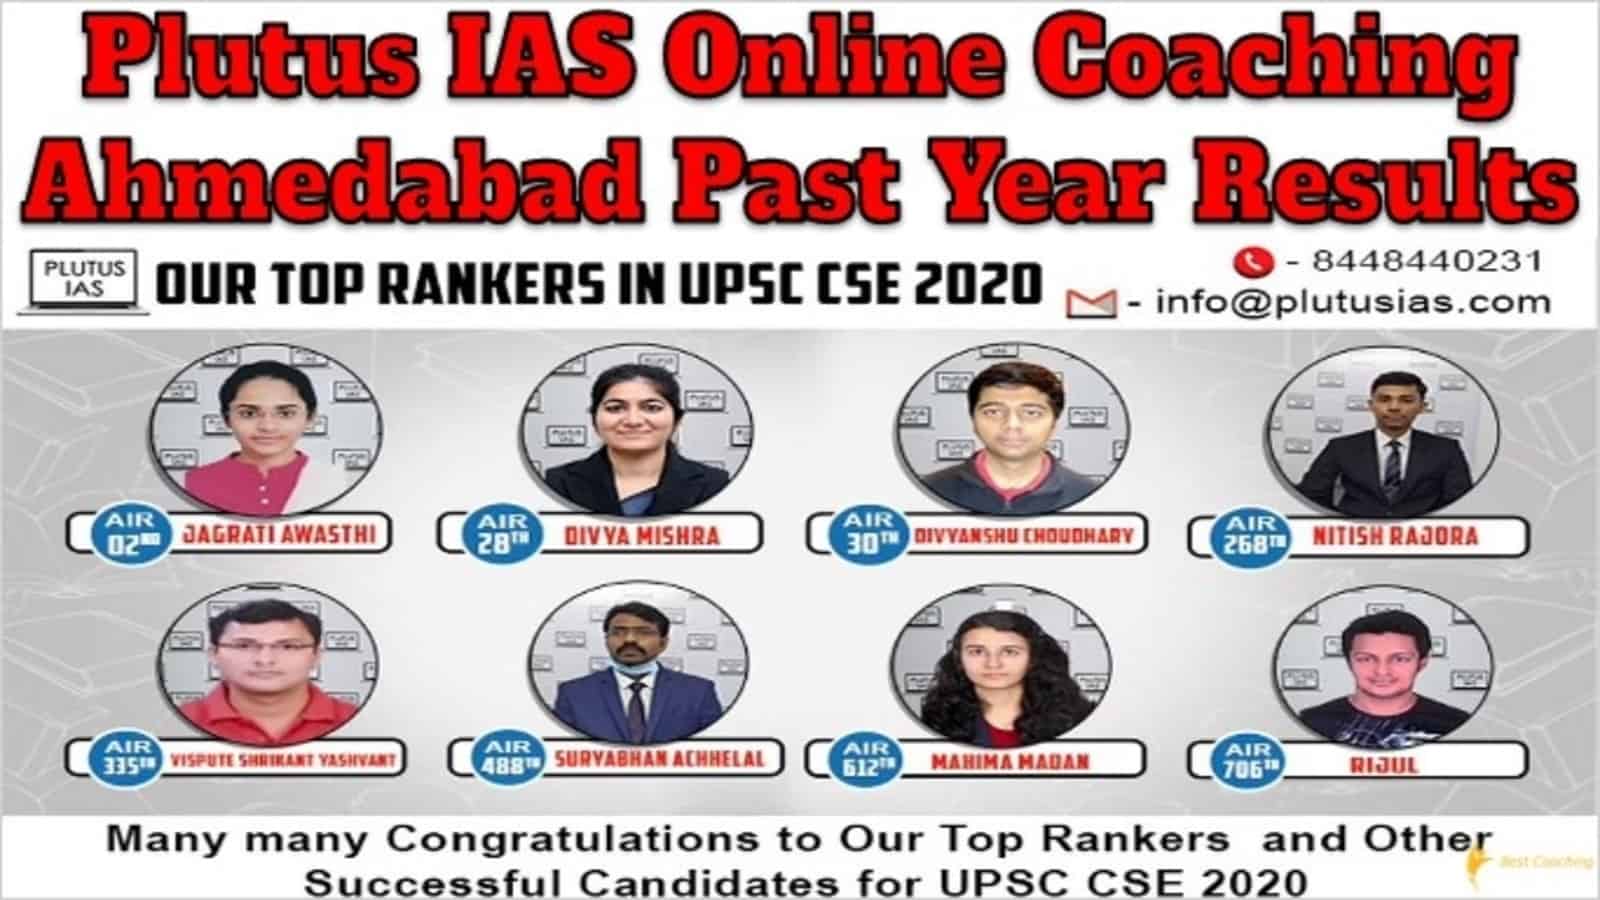 Plutus IAS Online Coaching Ahmedabad Past Year Results